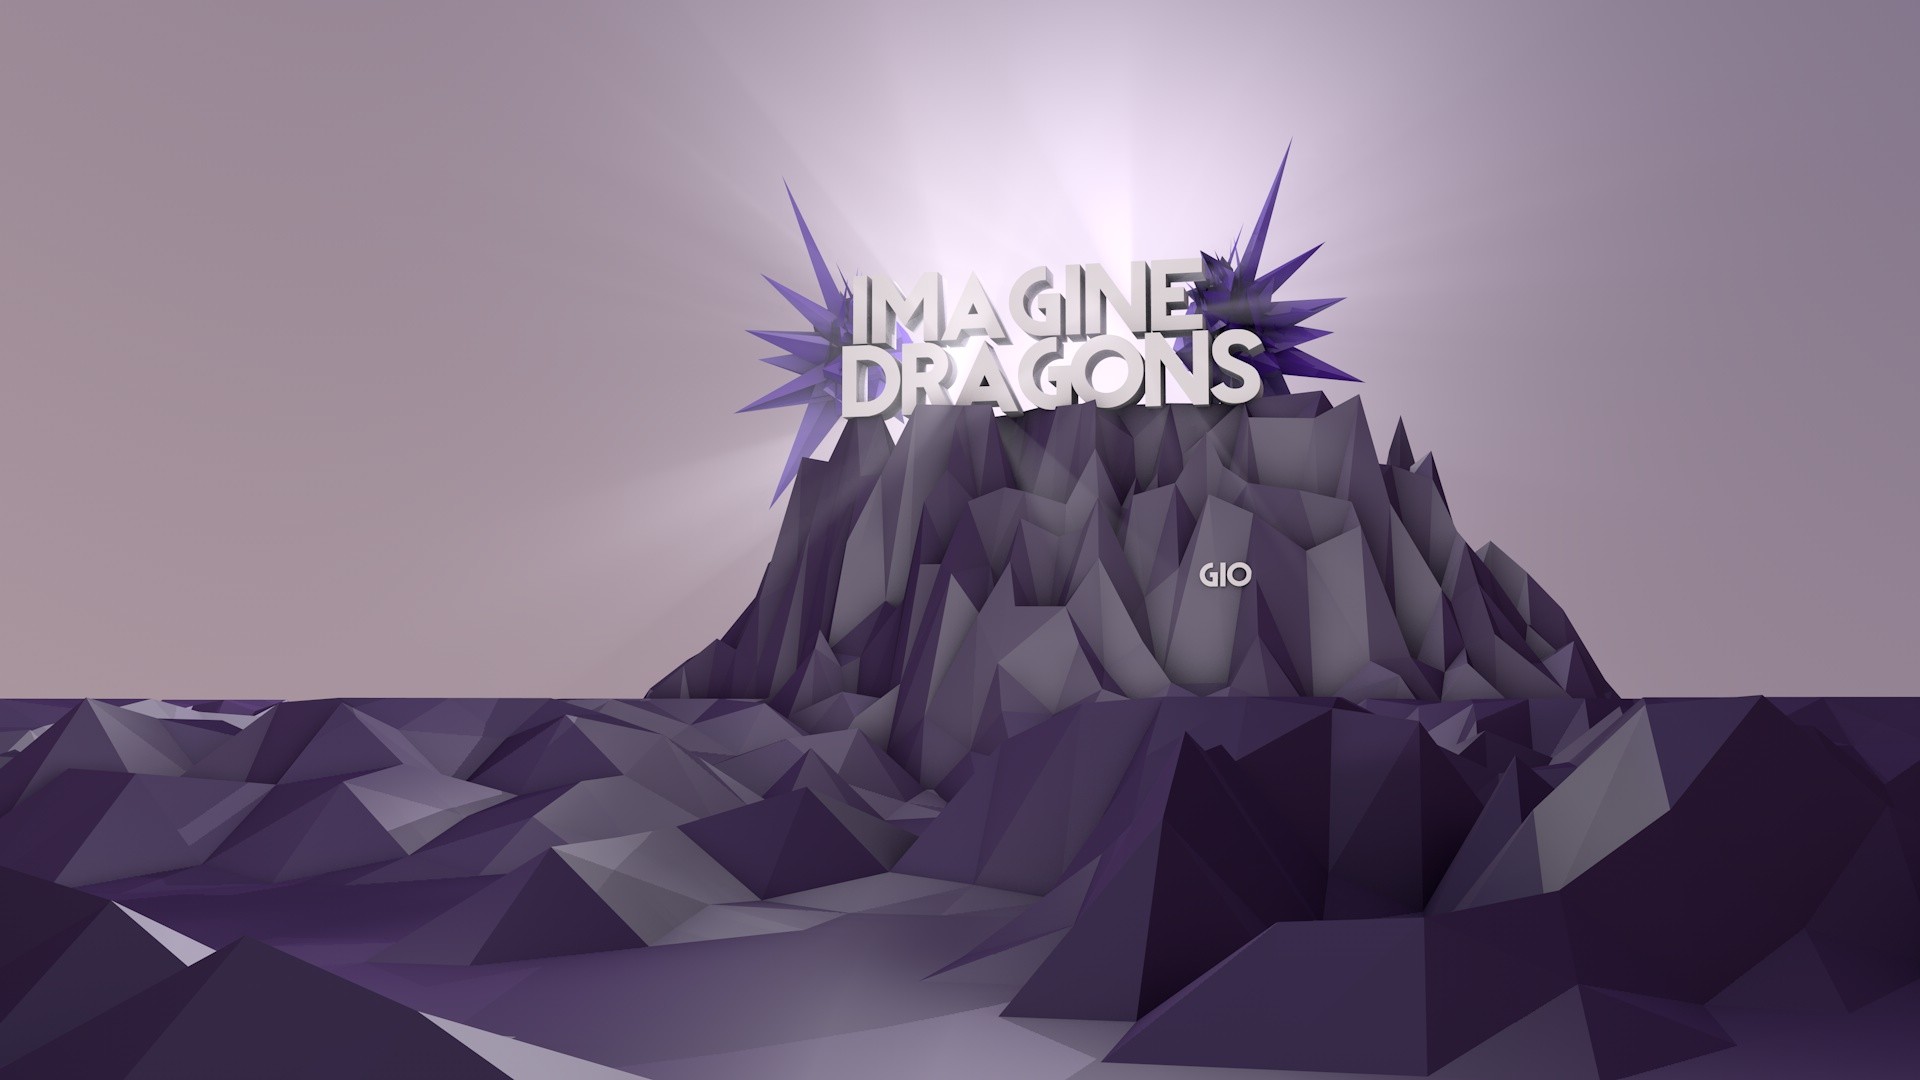 1920x1080 ... Imagine Dragons Wallpaper by gio-luckyboy